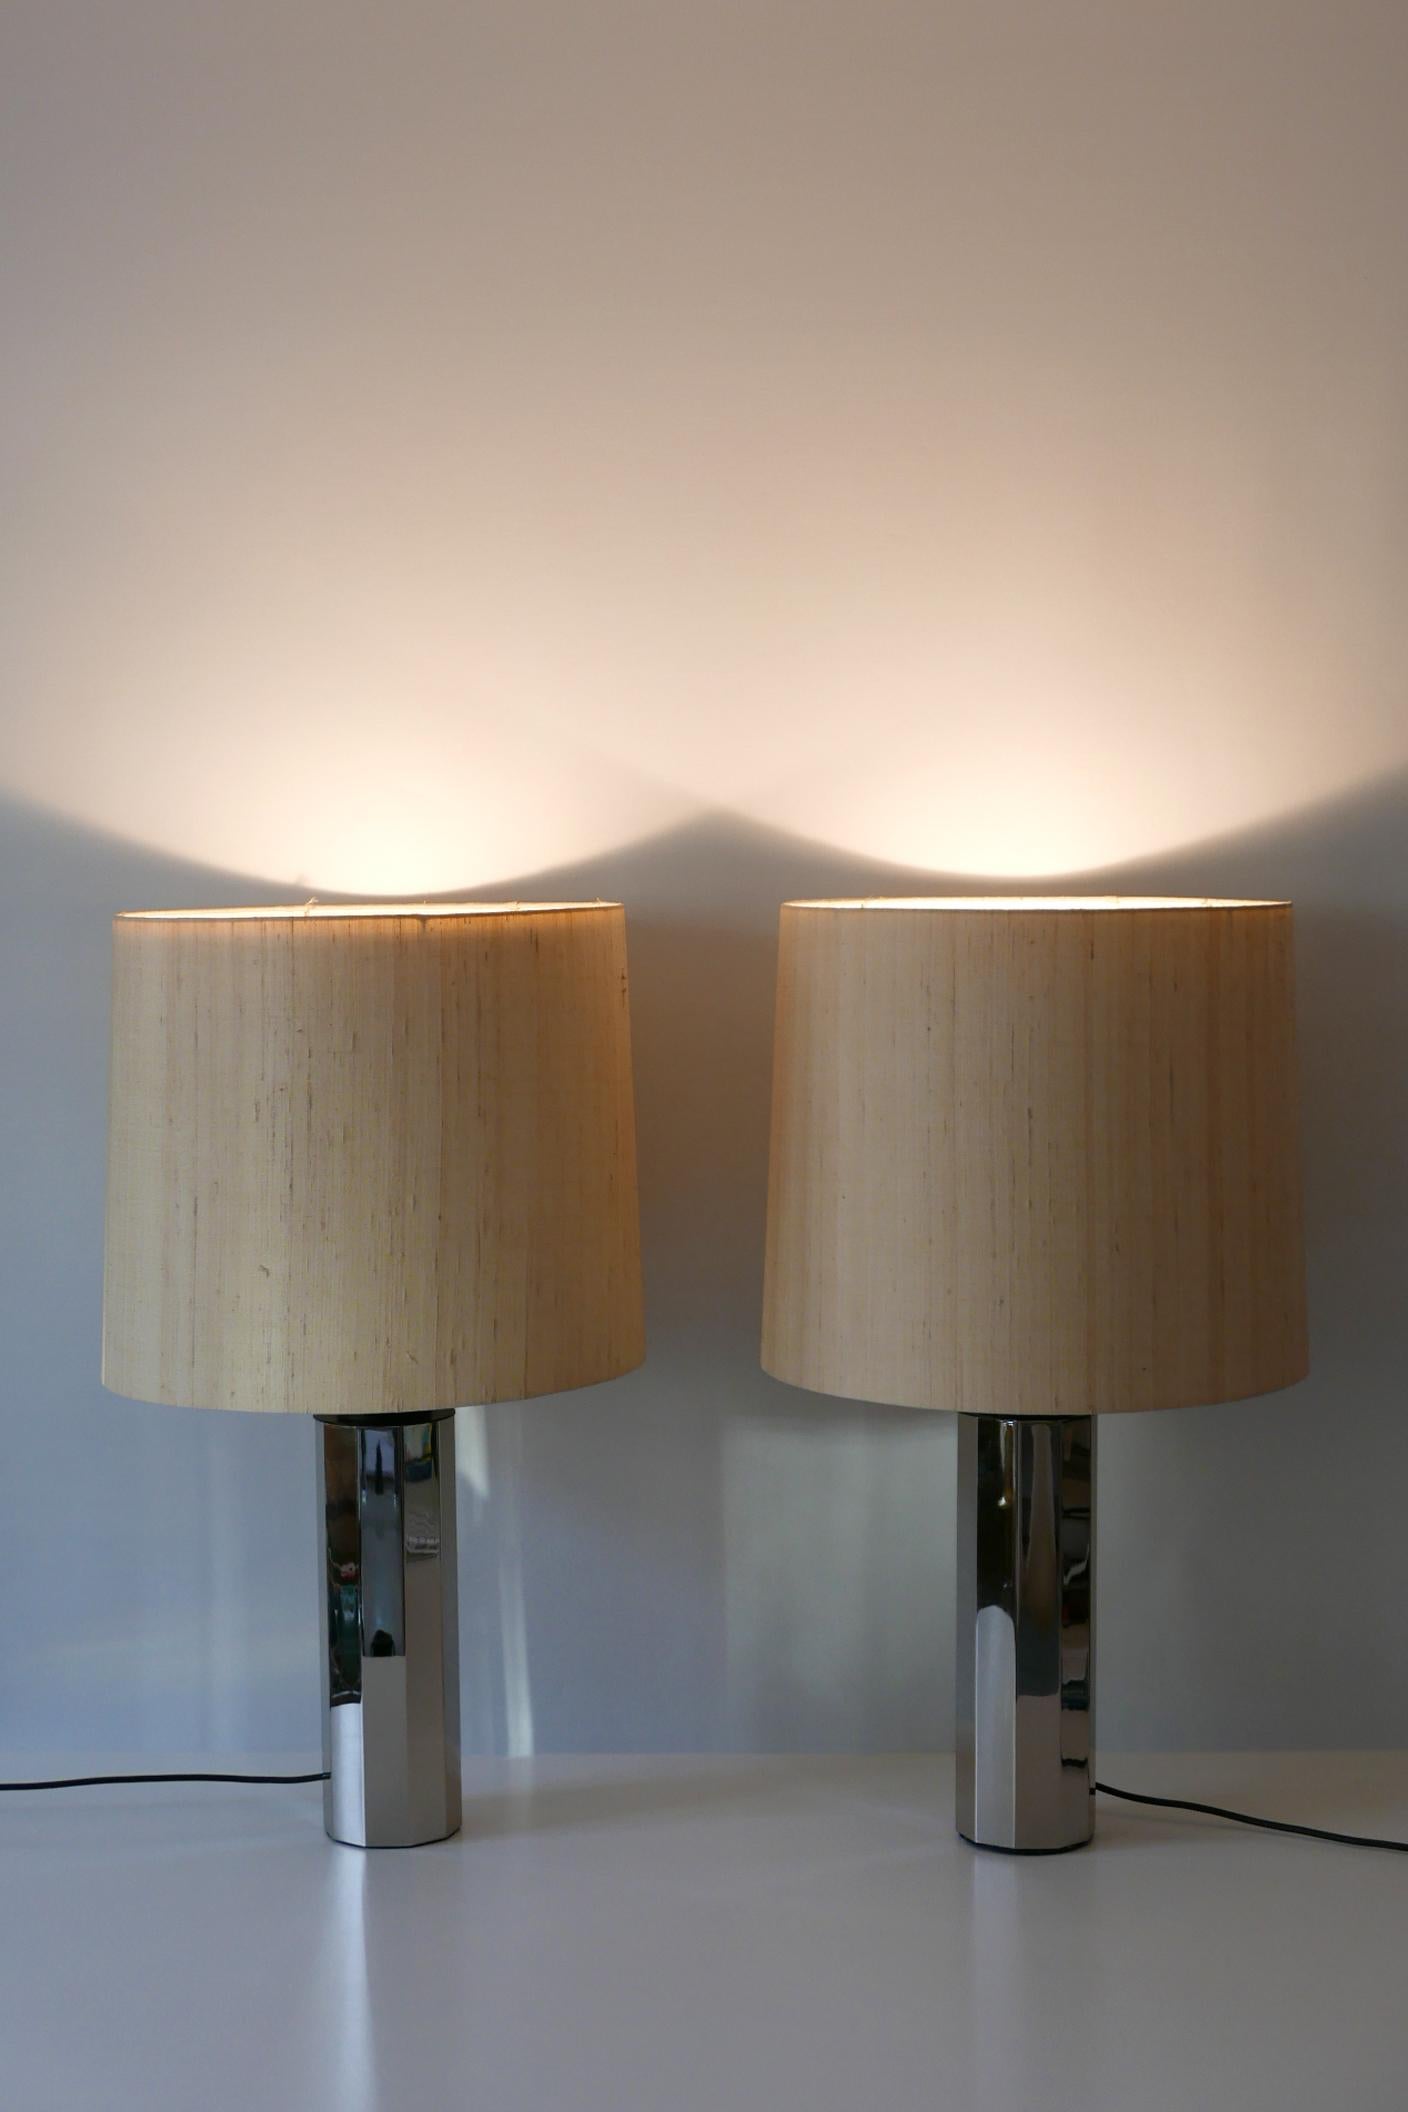 Set of Two Huge, 5-Flamed Midcentury Decagonal Chrome Table Lamps 1960s, Germany For Sale 3